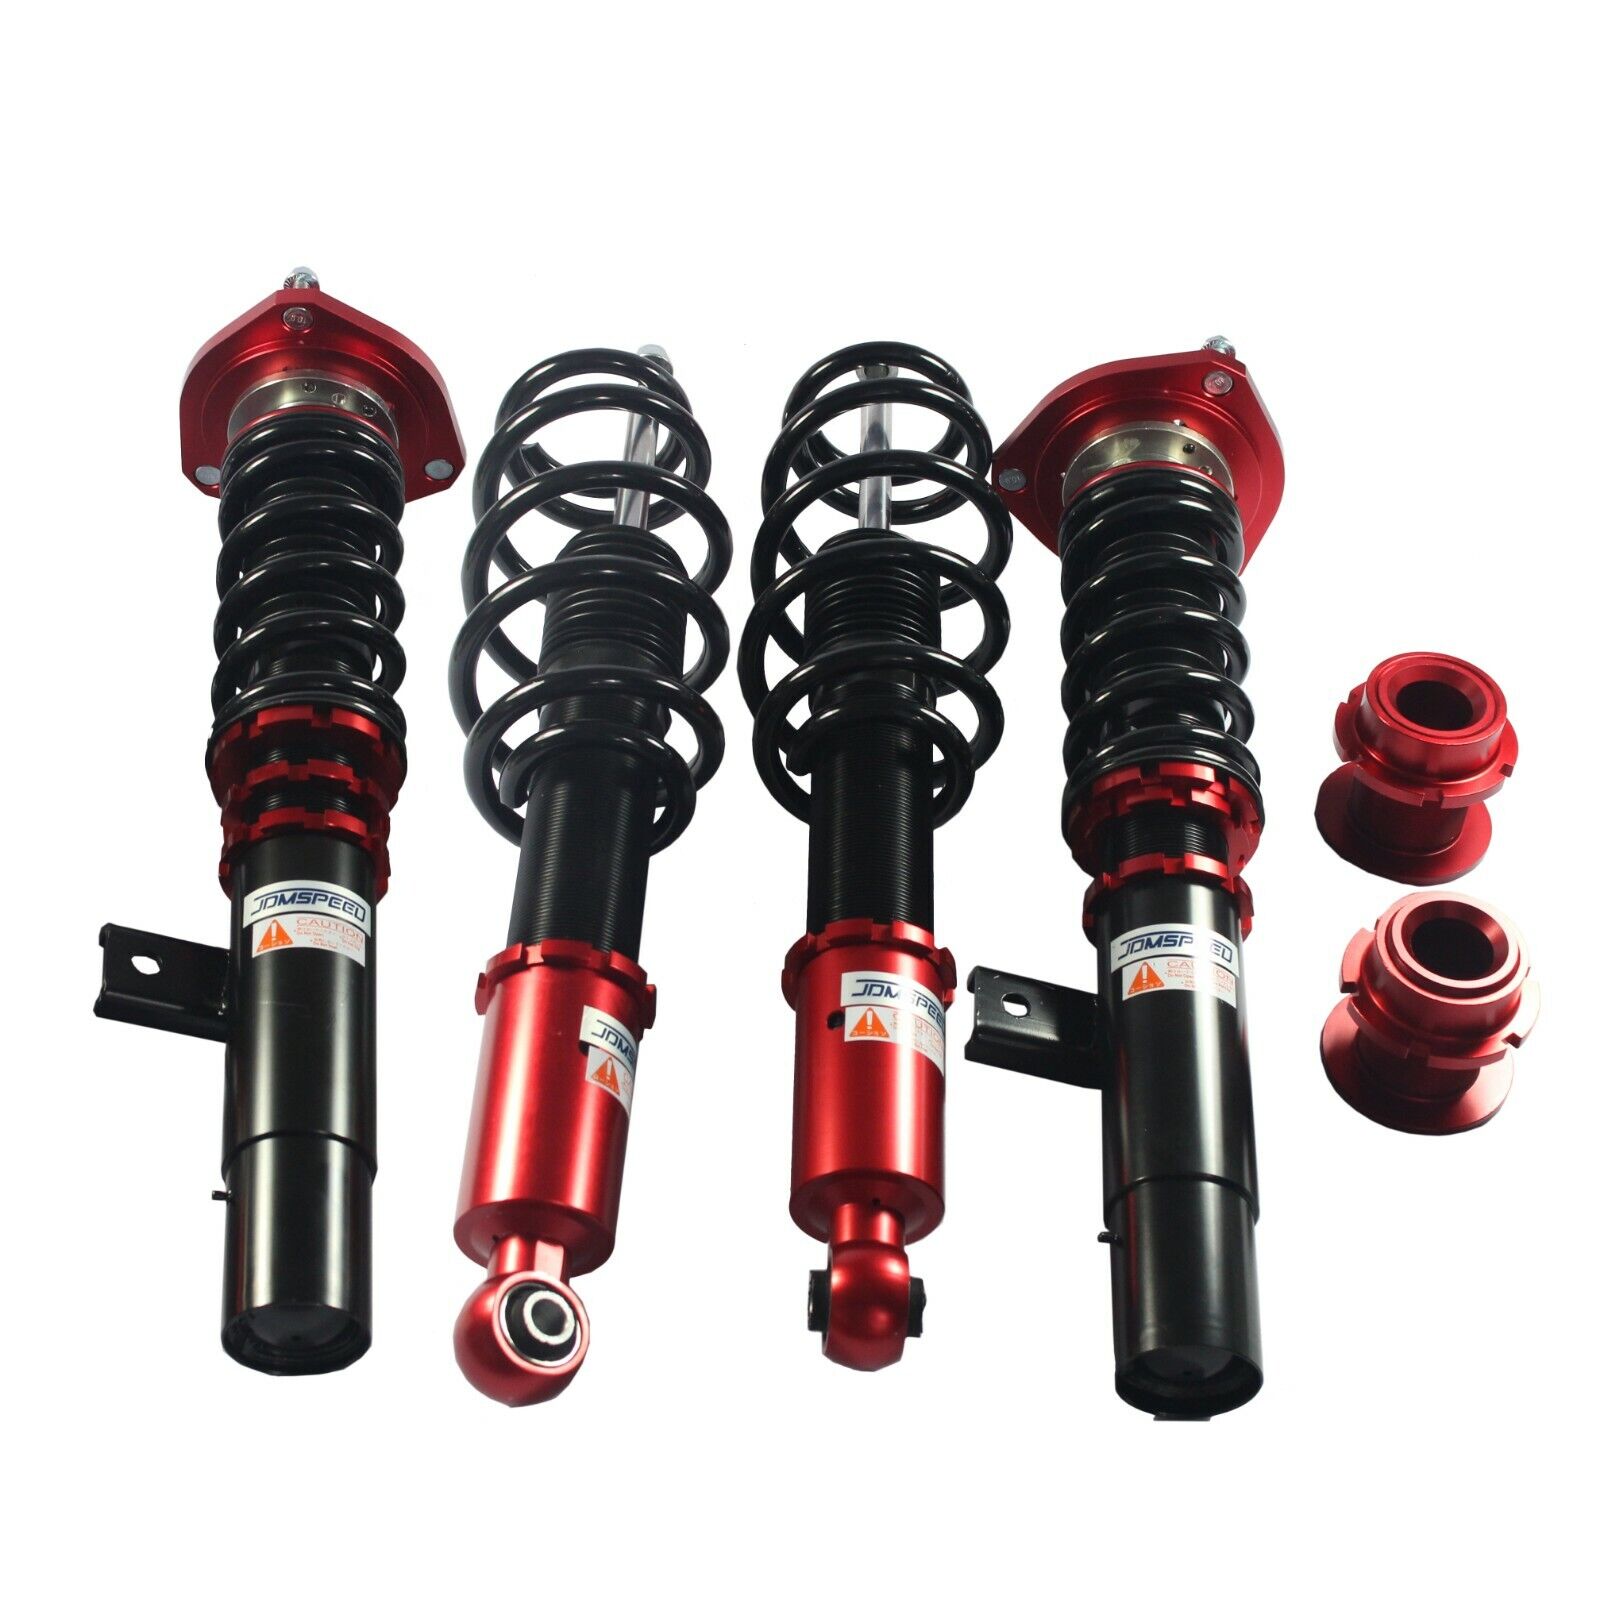 Red JDMSPEED Coilover Suspension Lowering Kits For 06-09 VW GTI/ 03-07 Golf MK5 